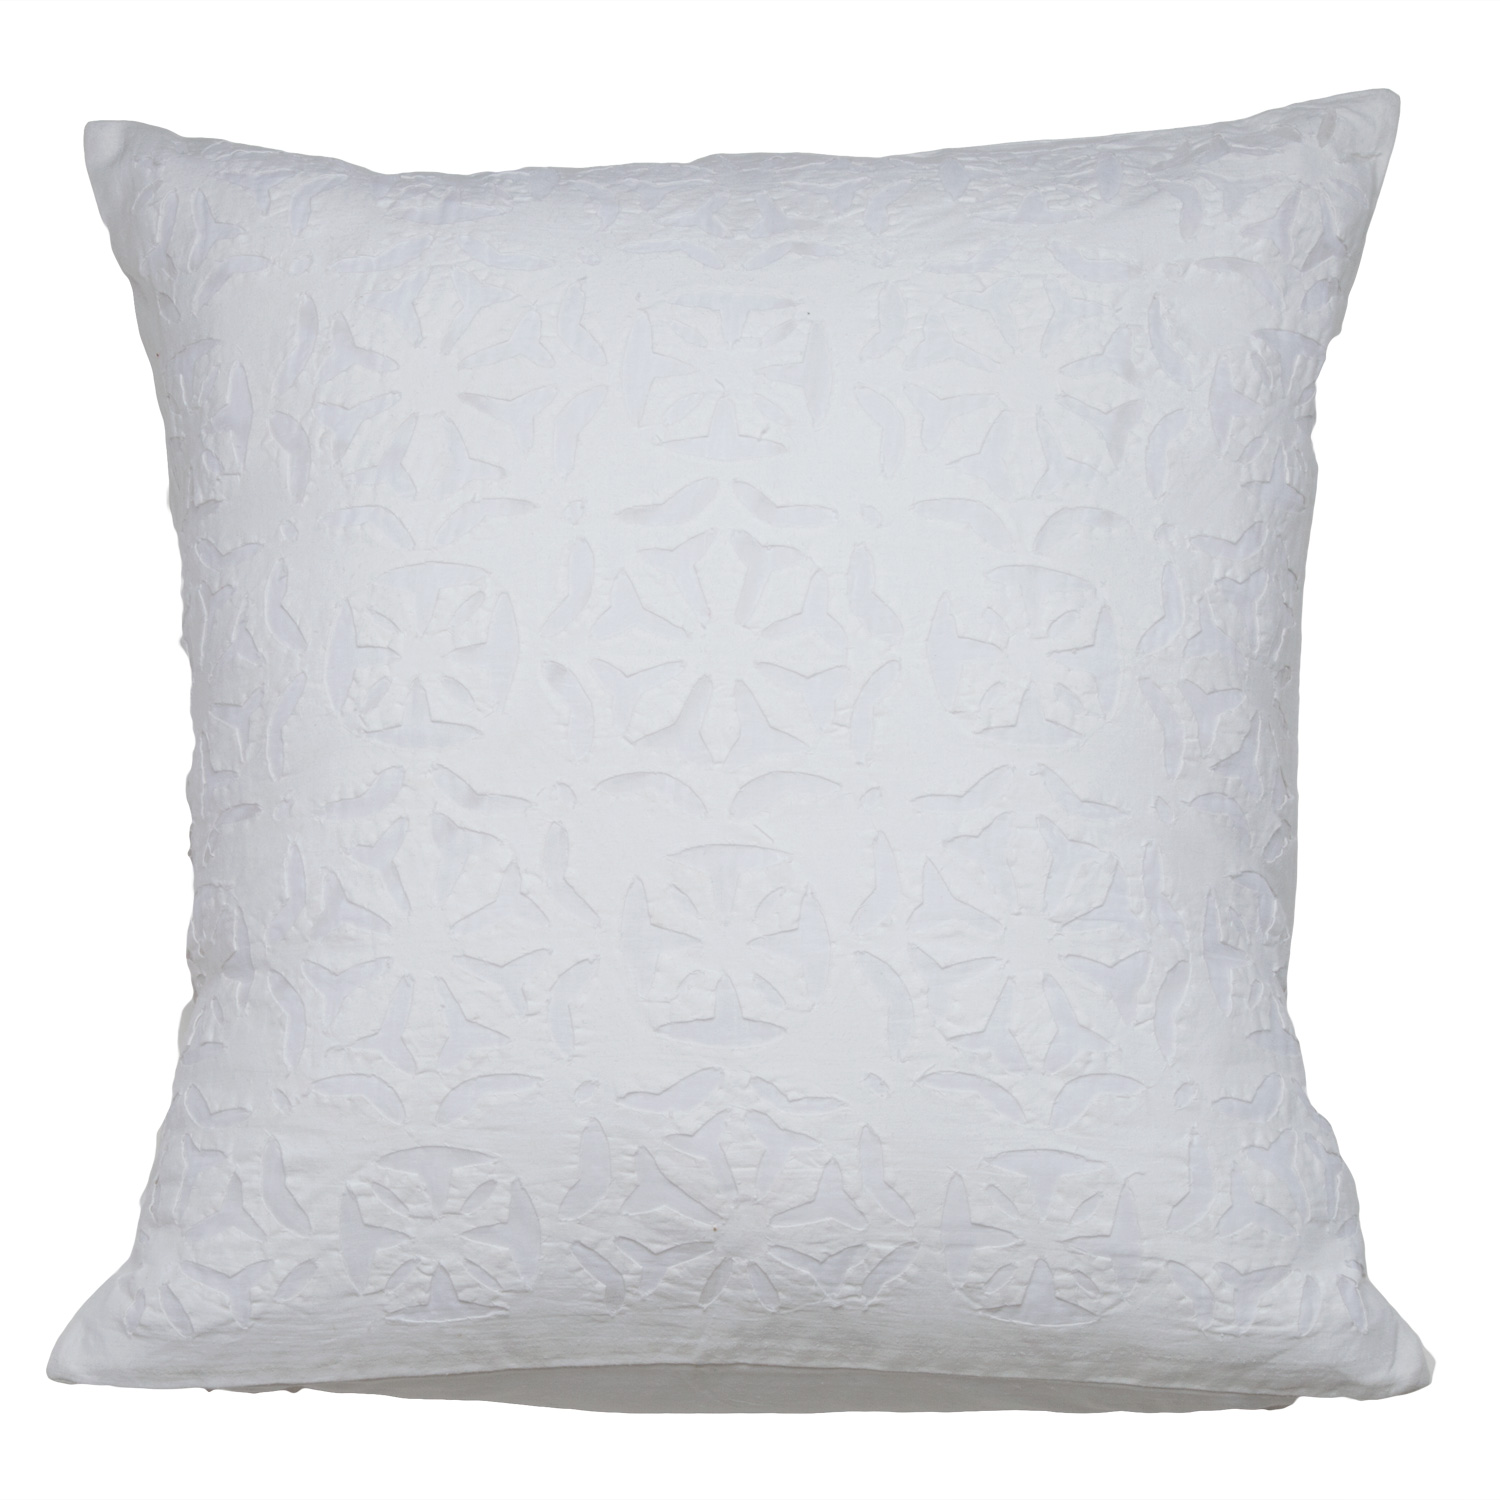 20x20 White Pillow Cover: Ayana Geometric Applique